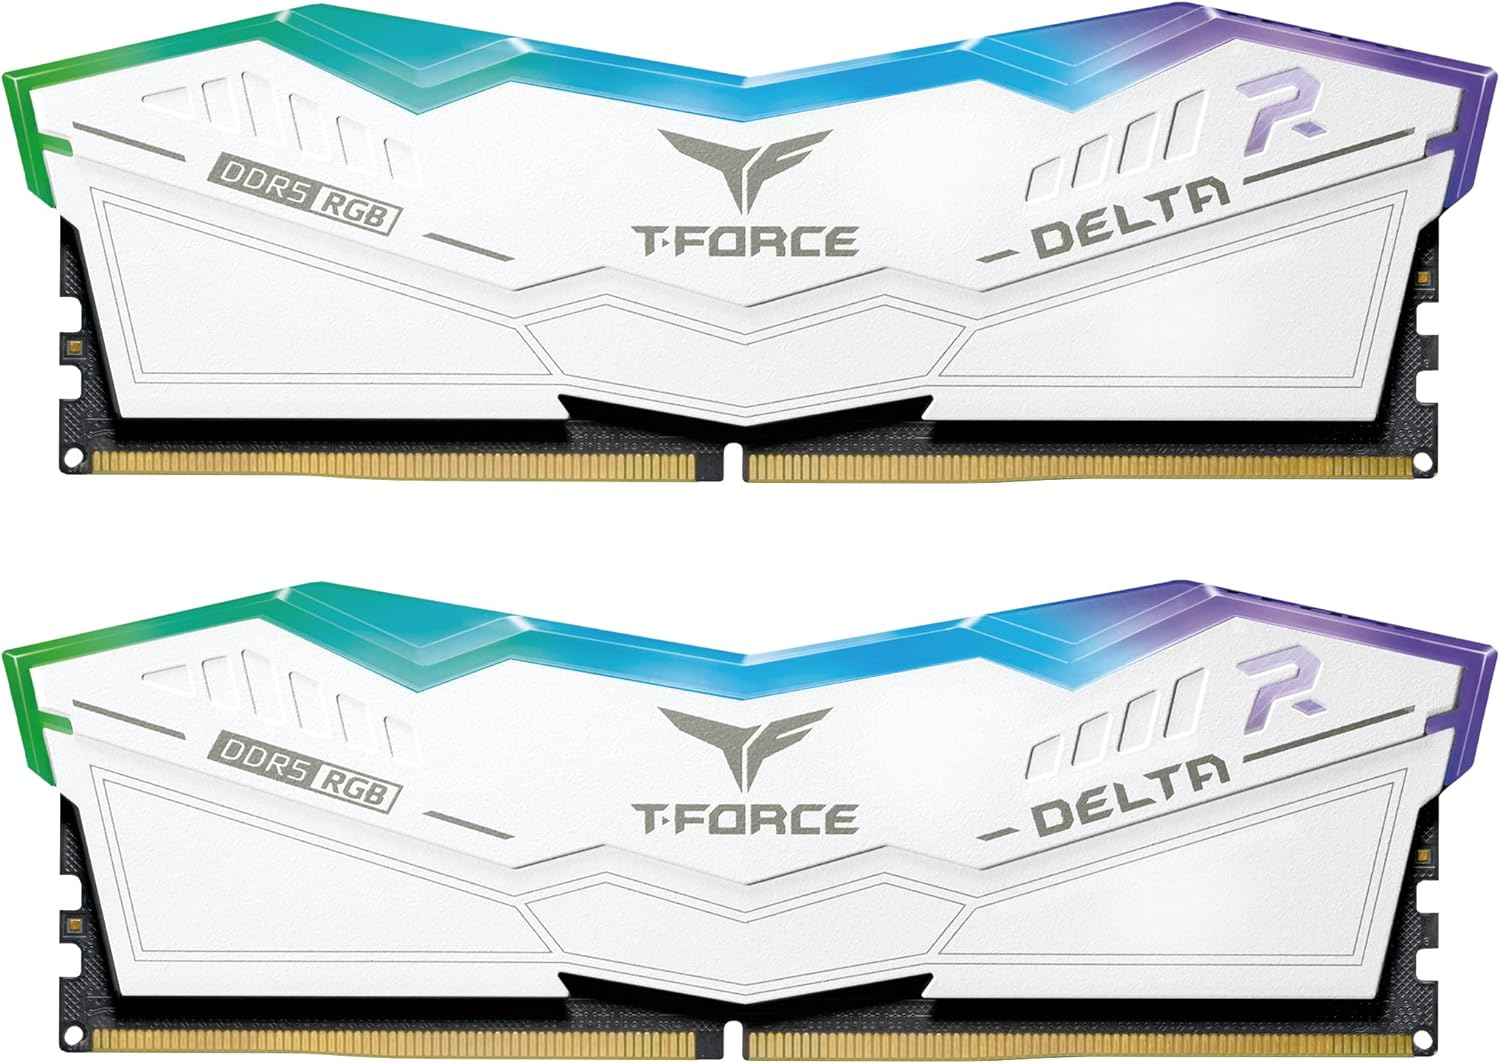 Teamgroup TForce Delta RGB DDR5 32GB RAM - Crong design with flexible anti-shock construction. 0765441659605